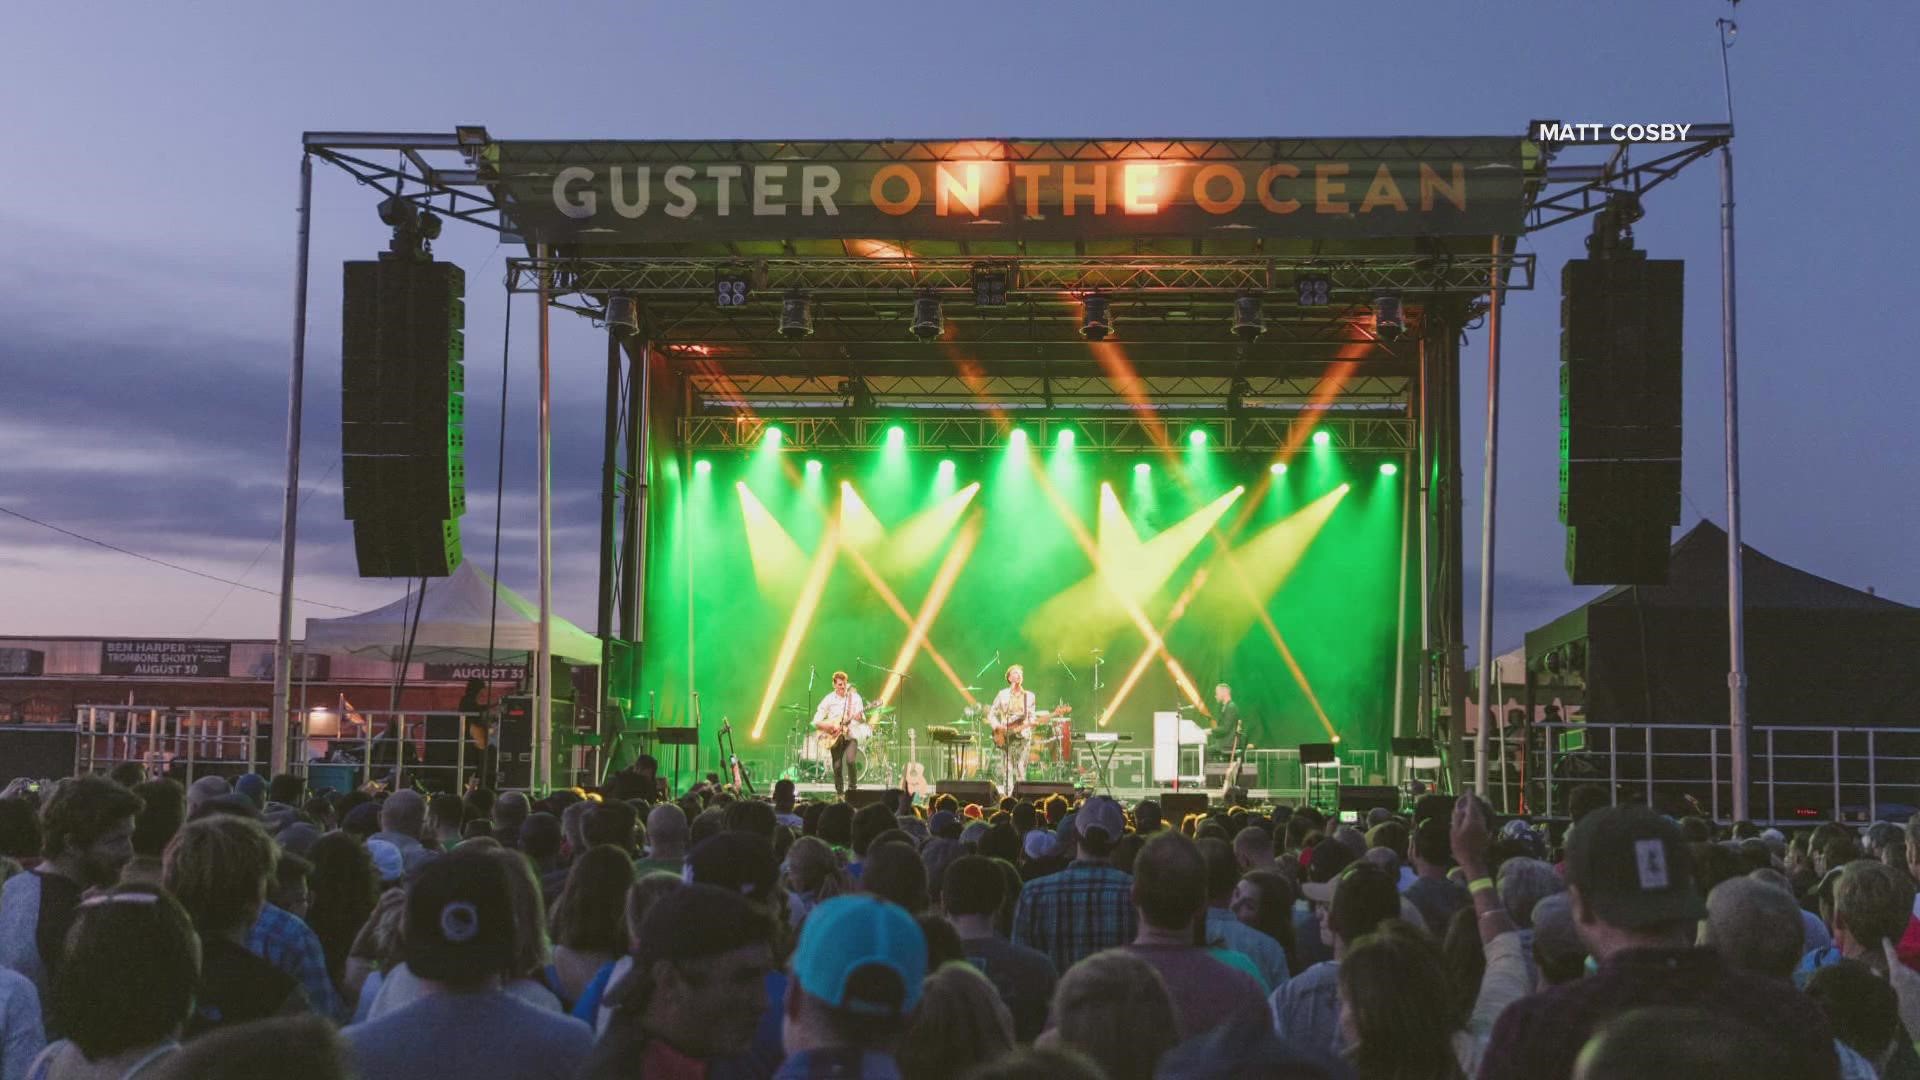 Its annual On the Ocean event returns to Maine “for kids and grownup kids of all ages”